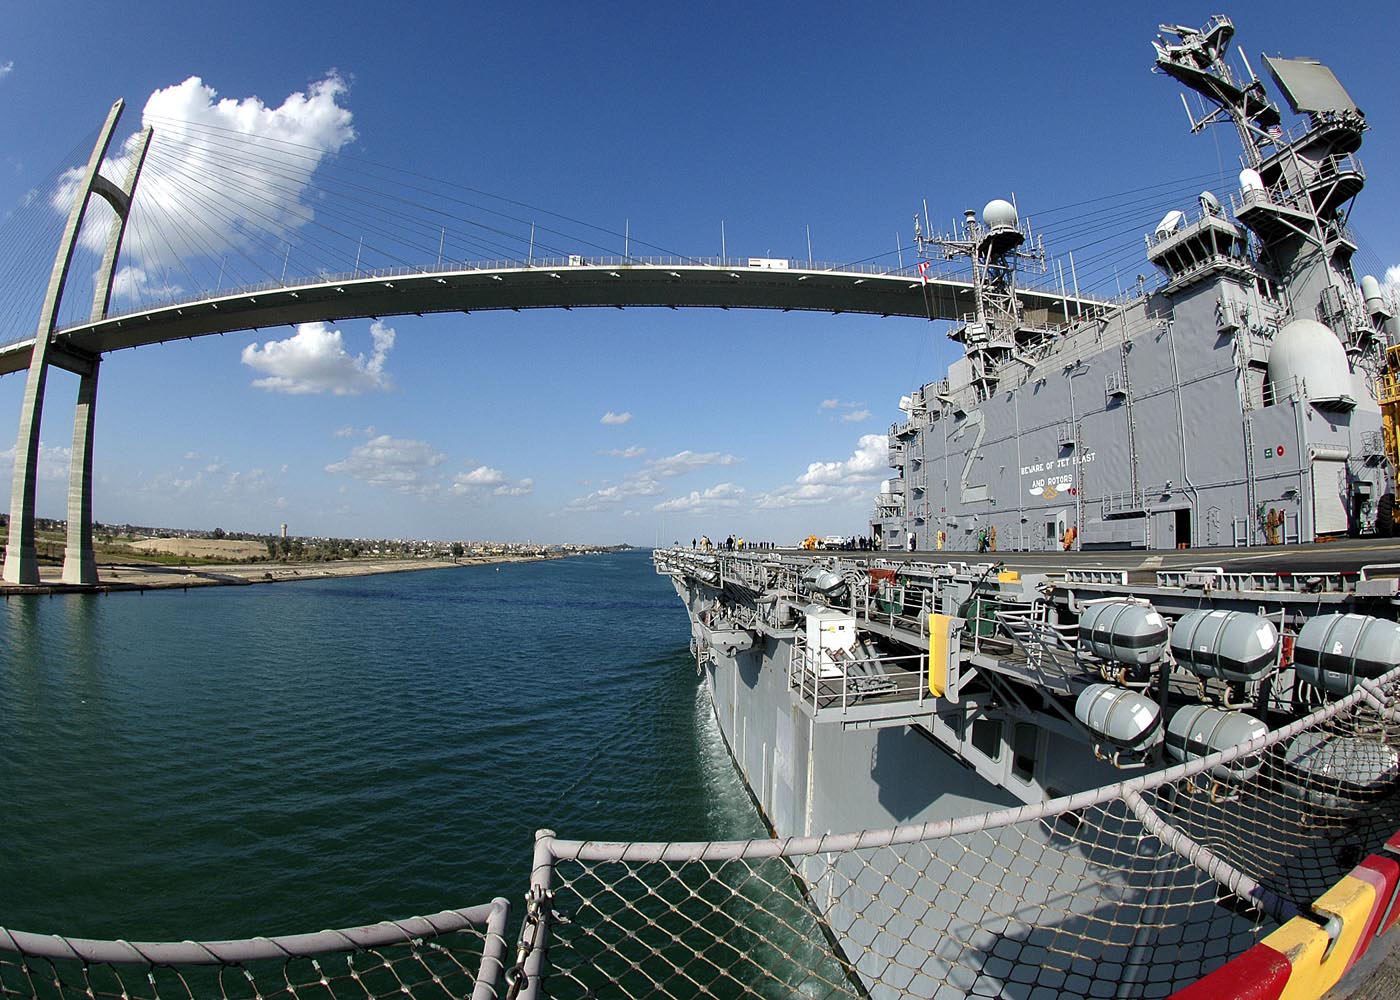 US_Navy_061204-N-8547M-034_The_amphibious_assault_ship_USS_Saipan_(LHA_2)_transits_north_in_the_Suez_Canal_after_successfully_completing_her_last_surge_deployment_before_decommissioning_in_April.jpg